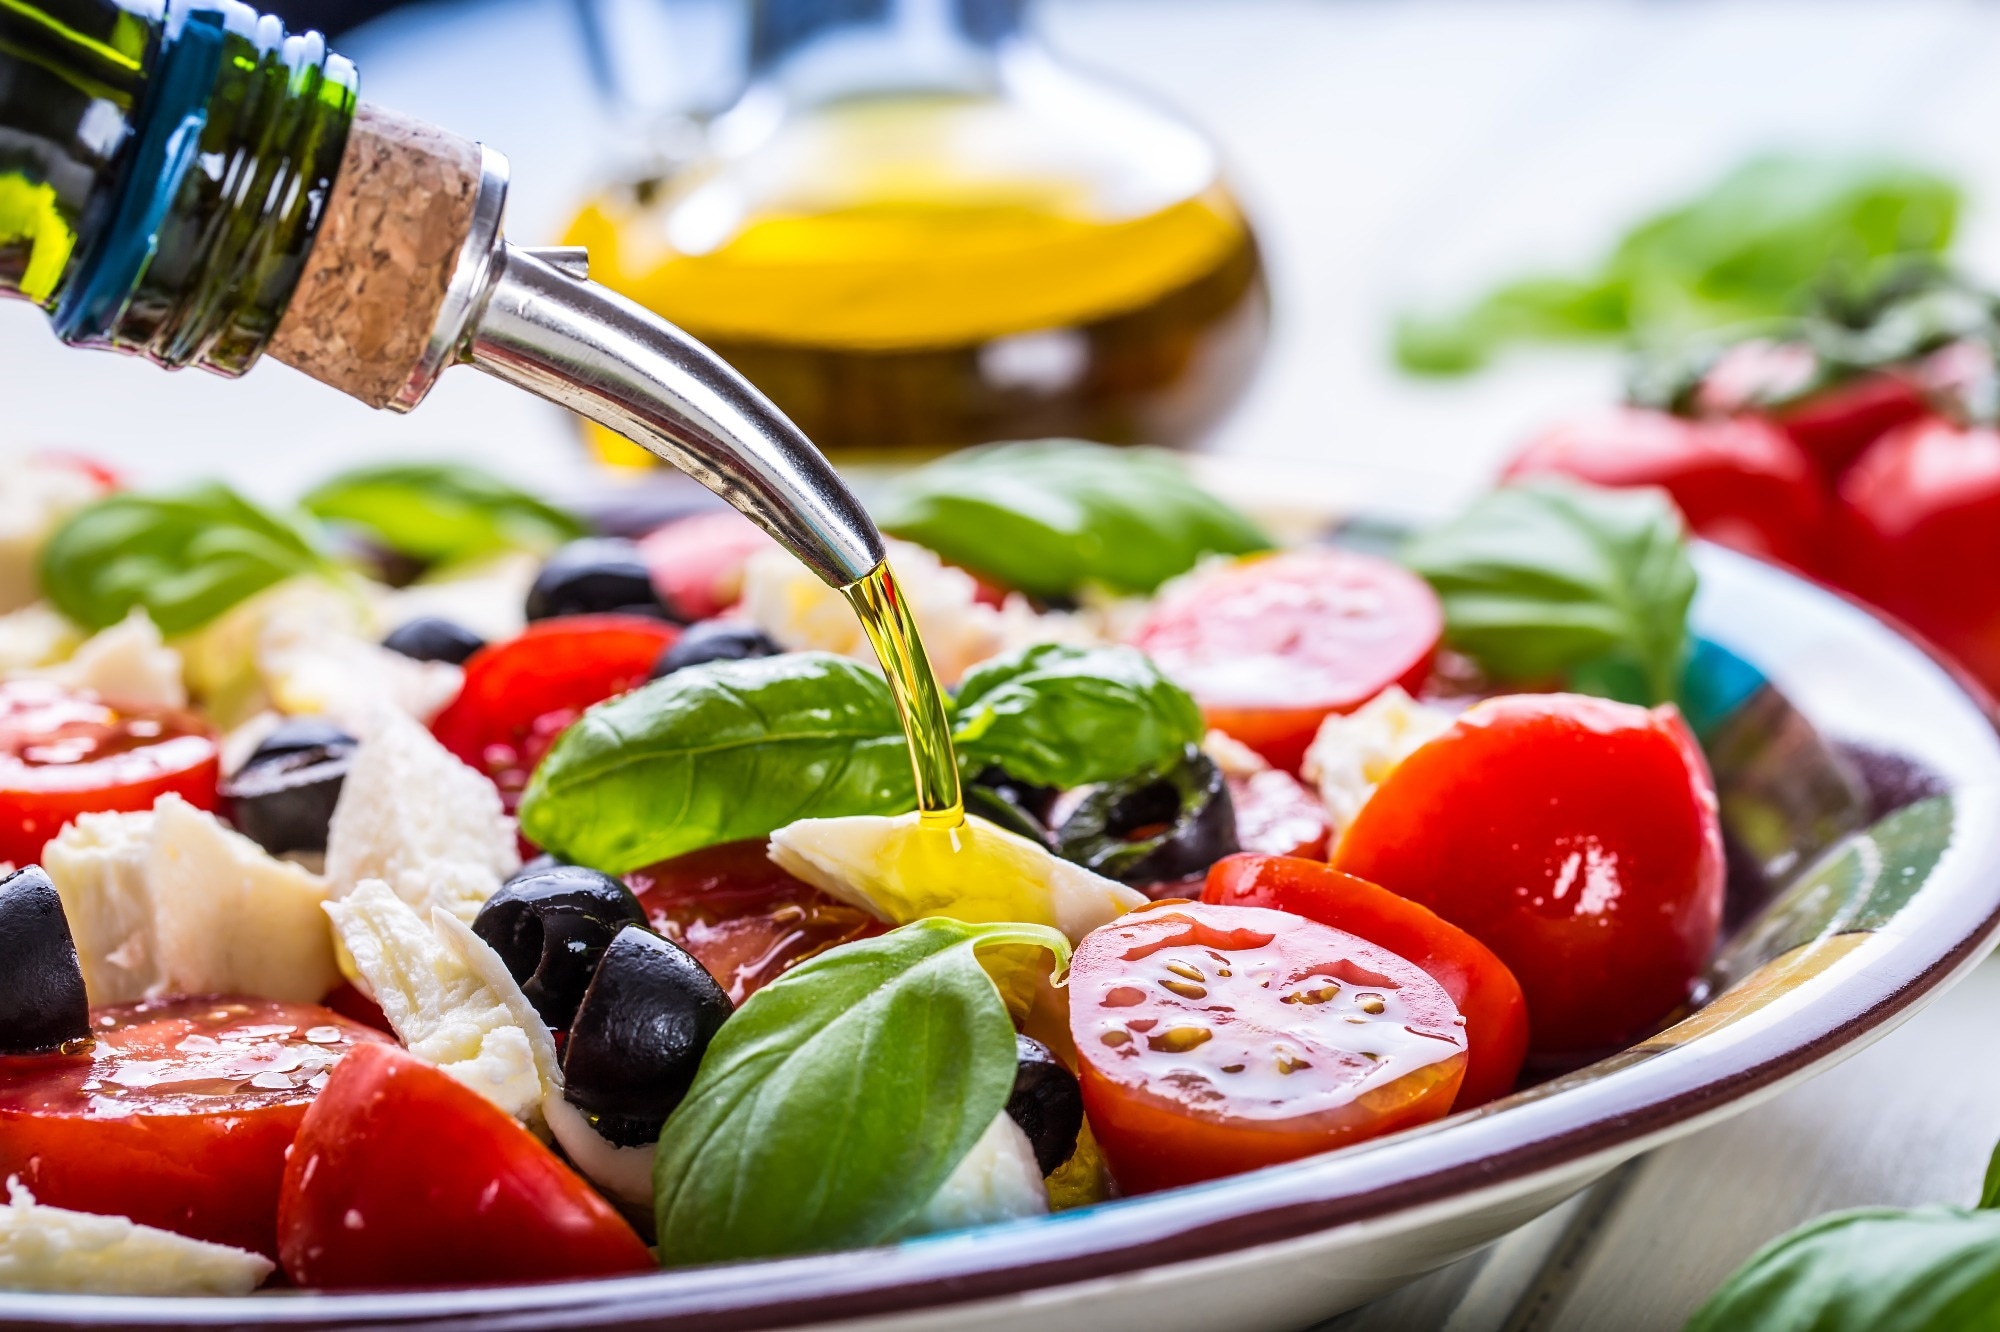 Study: Close Adherence to a Mediterranean Diet during Pregnancy Decreases Childhood Overweight/Obesity: A Prospective Study. Image Credit: Marian Weyo/Shutterstock.com